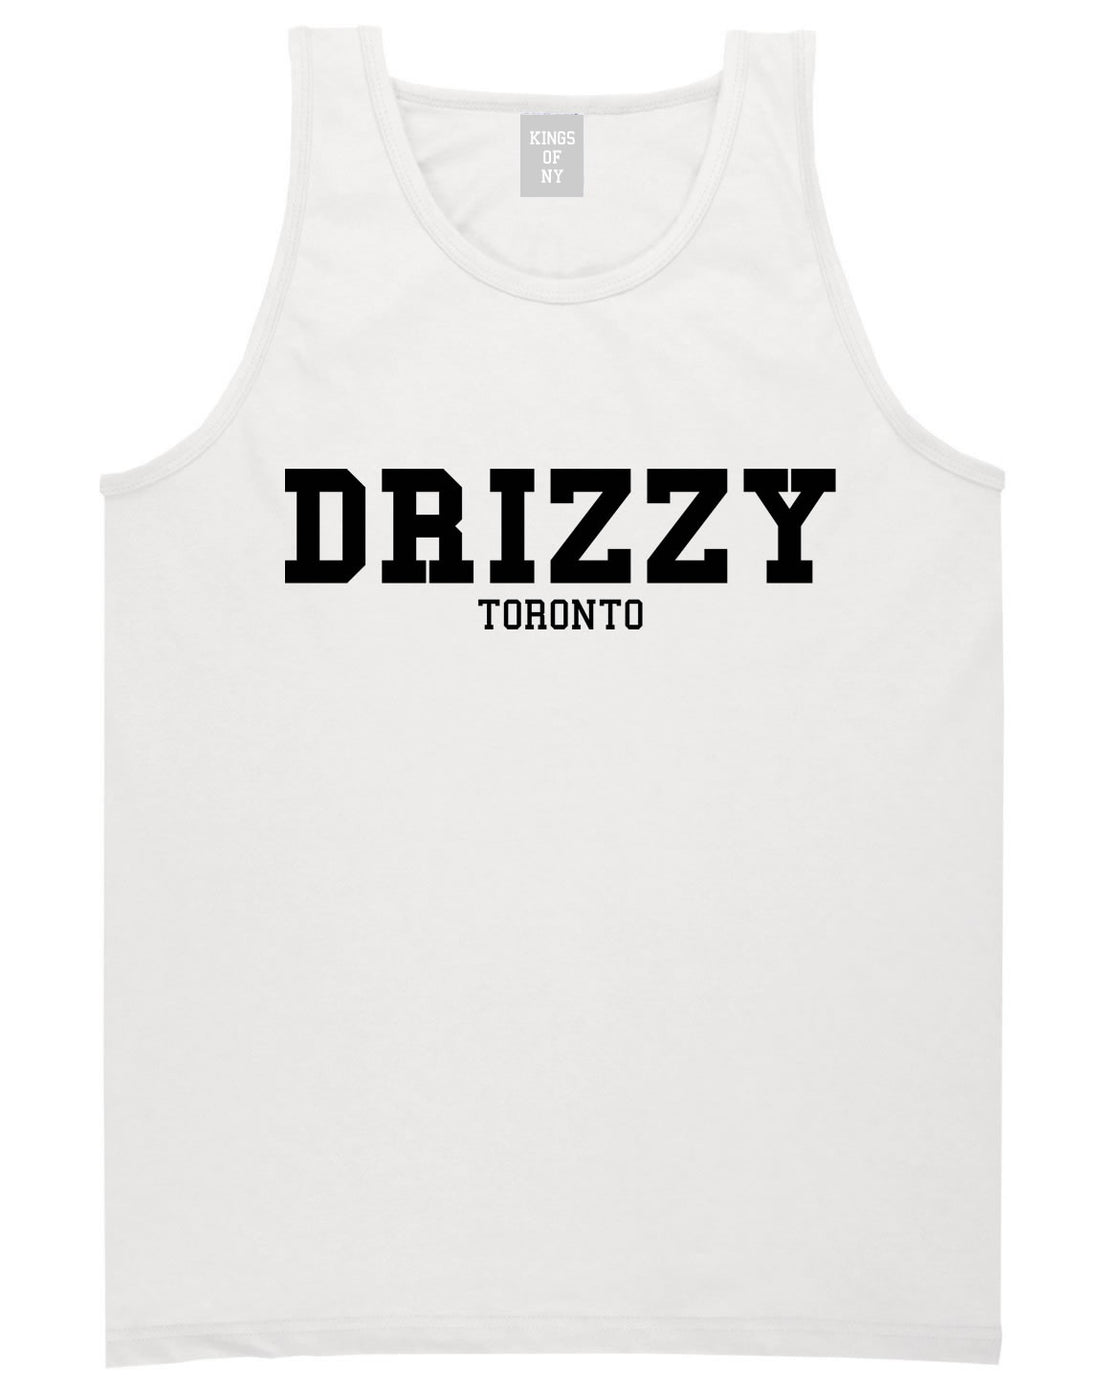 Drizzy Toronto Canada Tank Top in White by Kings Of NY